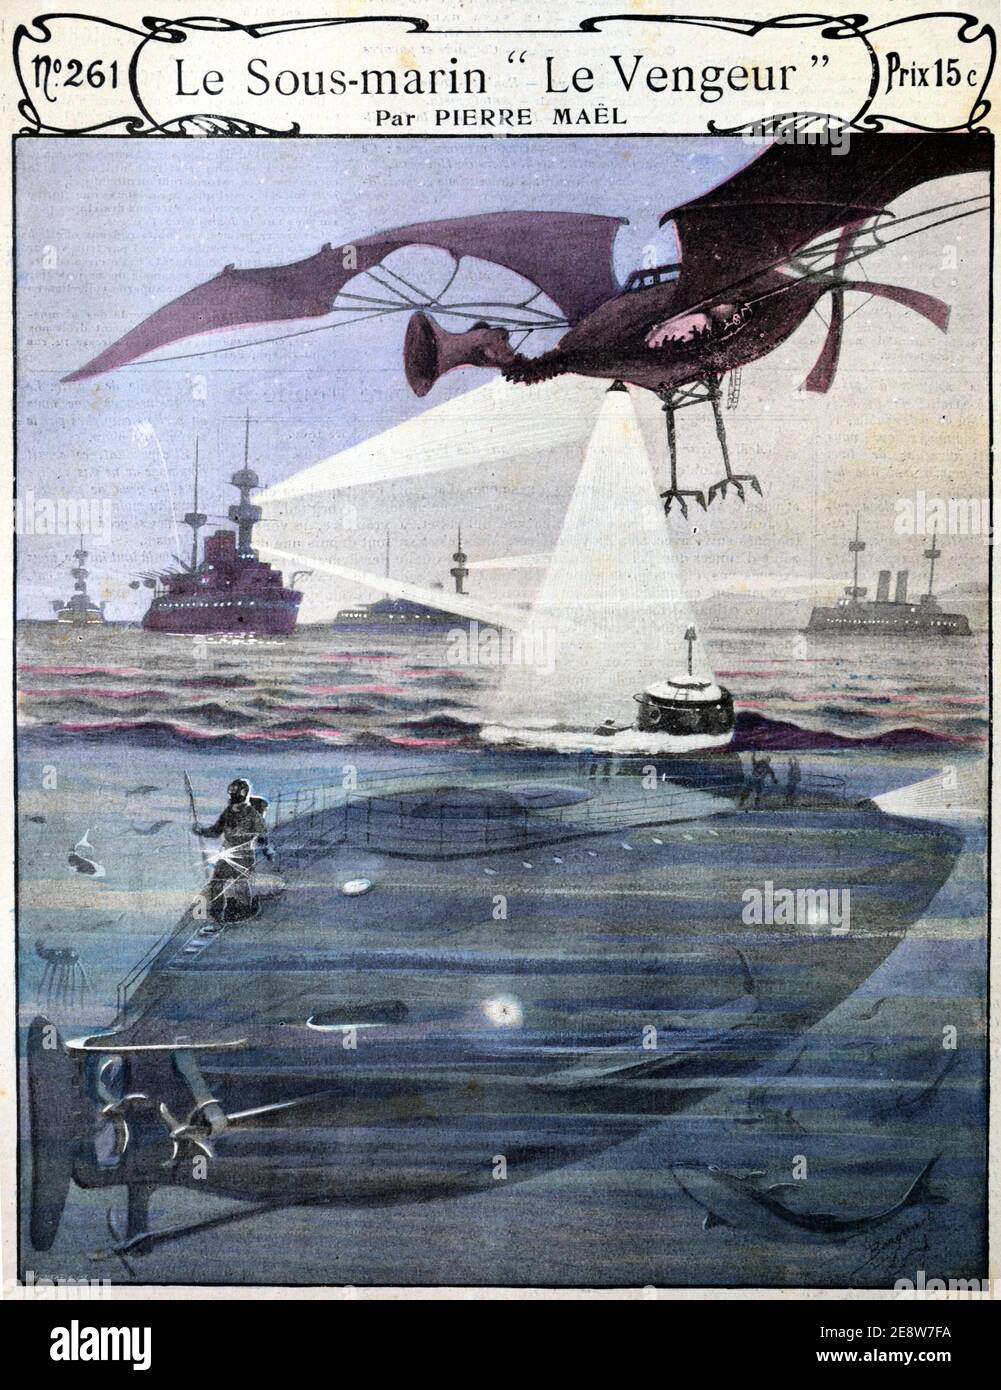 Old Book Cover 'Le Sous-marin Le Vengeur' by Pierre Maël showing Futurist Early French Submarine The Vengeur & a Strange Early Flying Machine, Aircraft or Airplane 1901 Vintage Illustration or Engraving Stock Photo